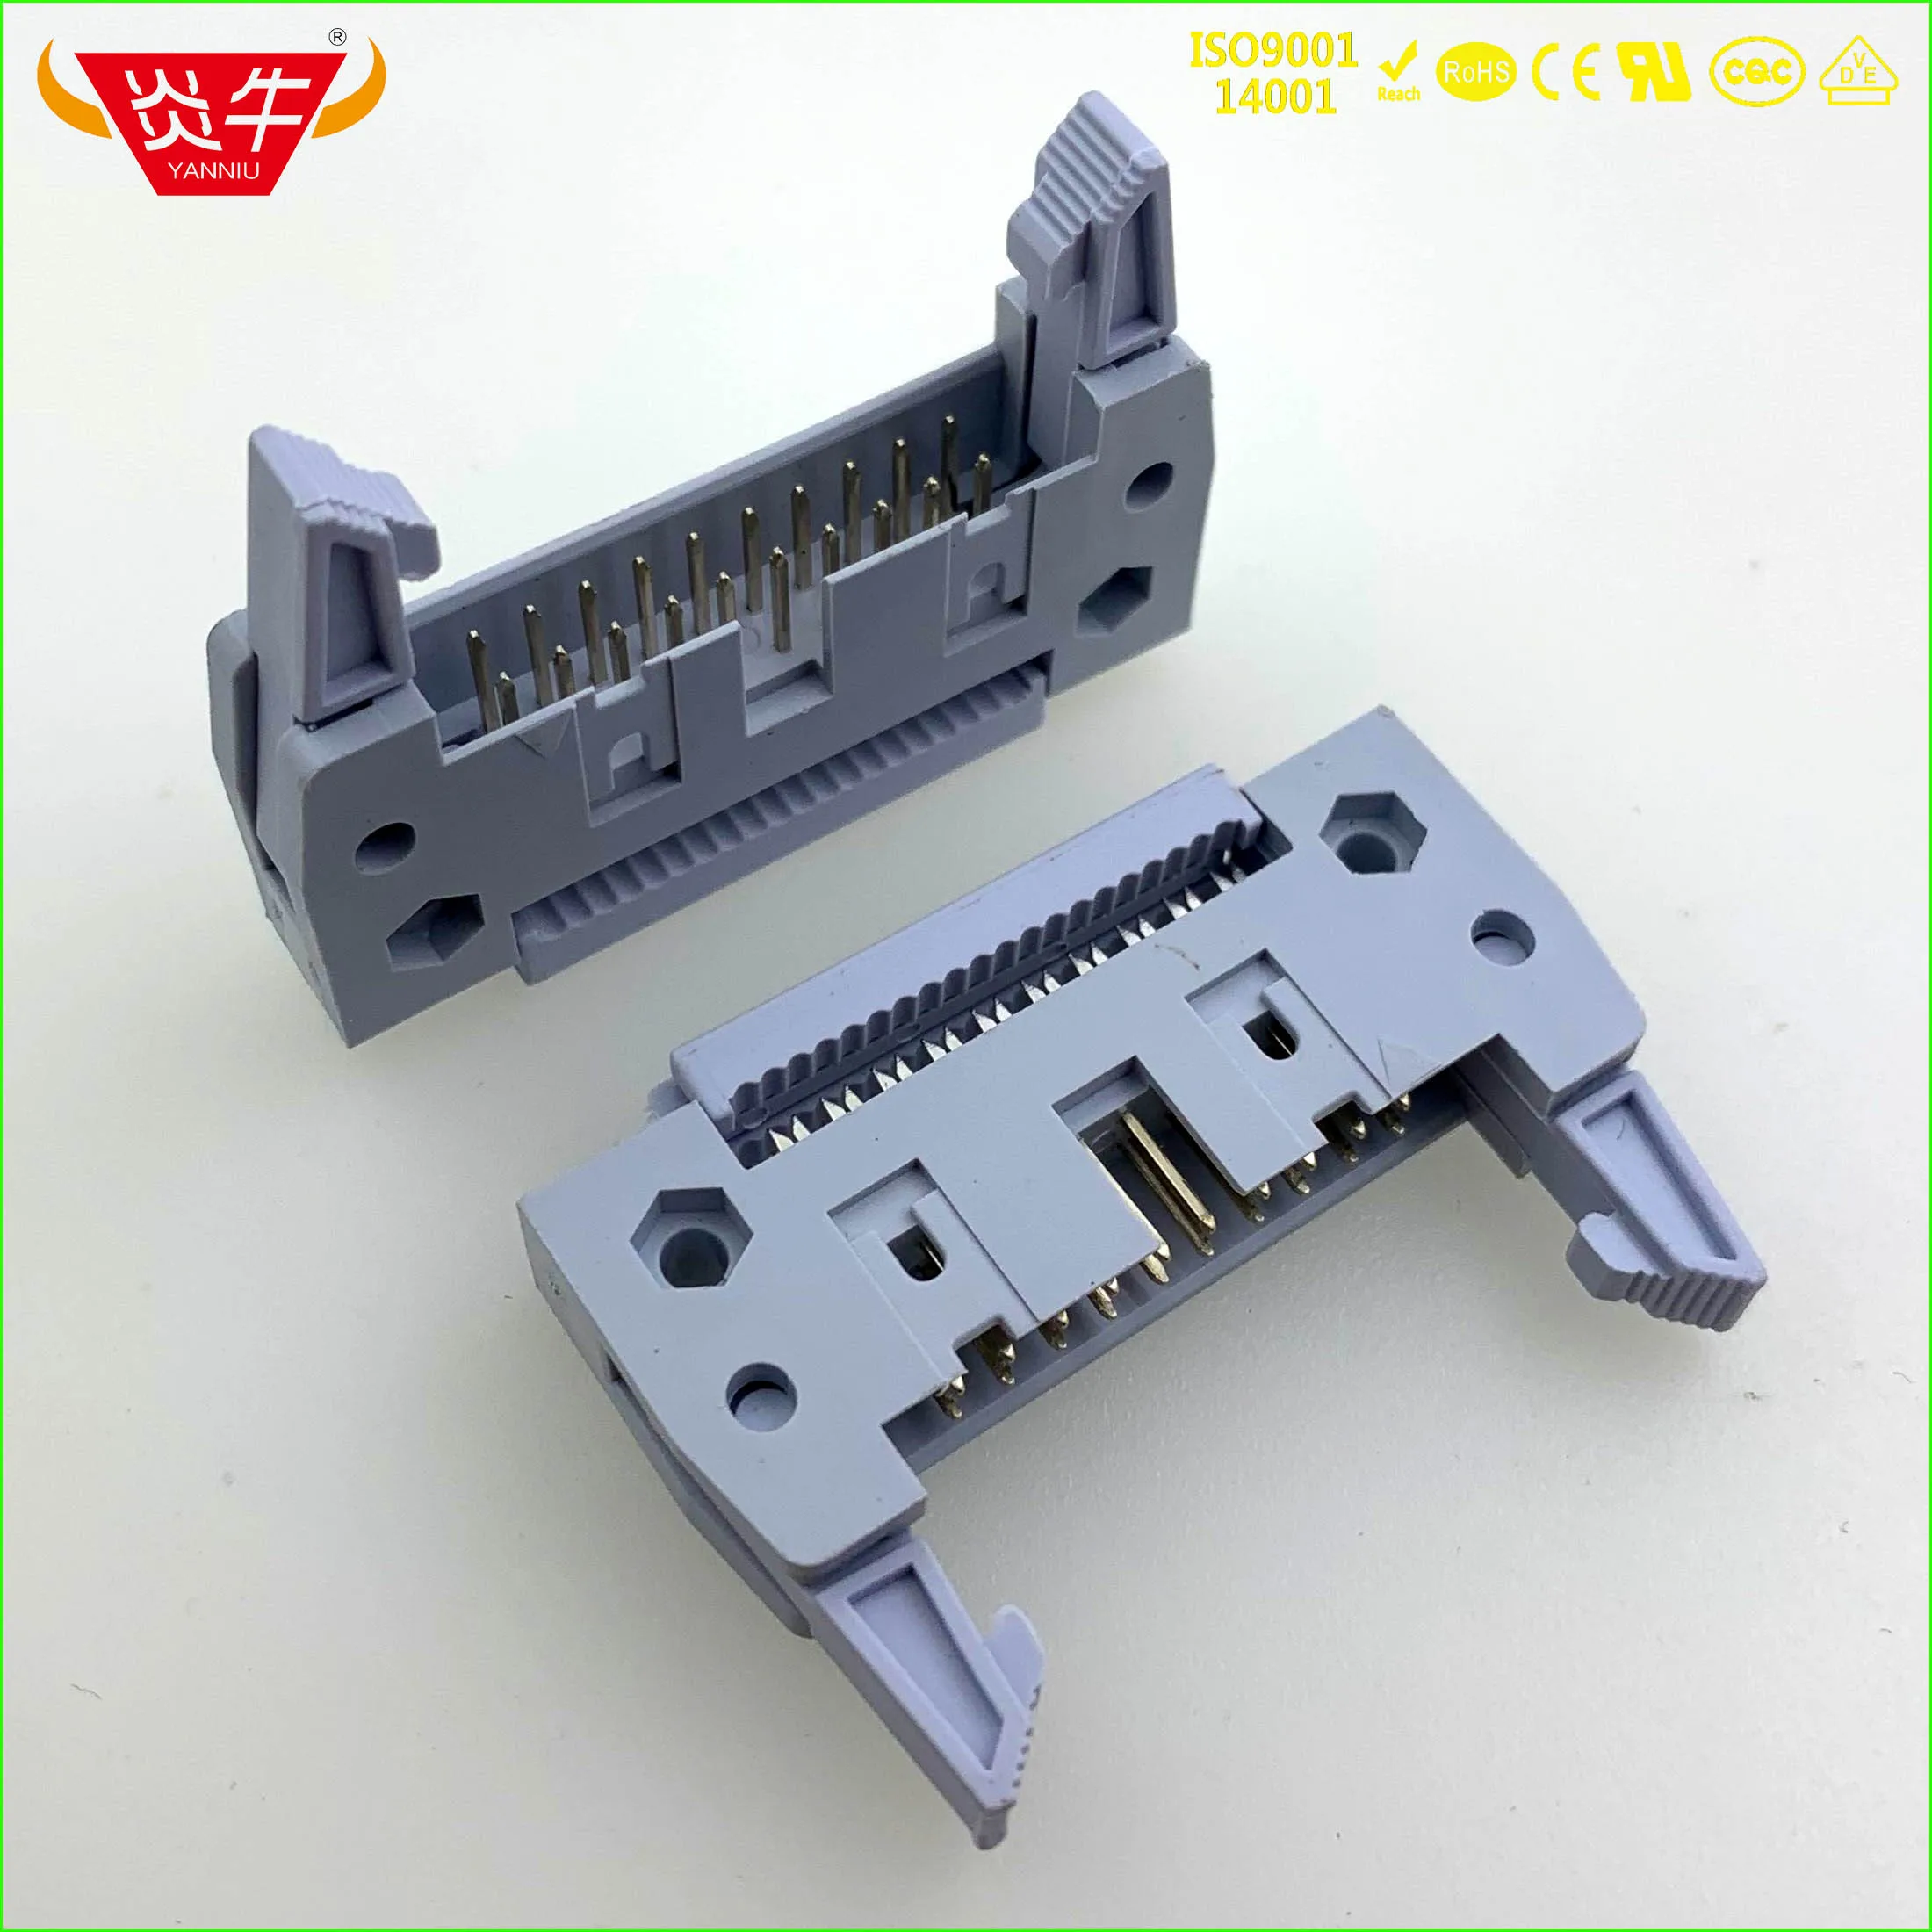 

50Pcs CRIMPING ROW LINE DC2-DIDC-20P SOCKET BOX 2.54mm PITCH EJECTOR HEADER CONNECTOR 2*10P 20PIN CONTACT PART GOLD-PLATED